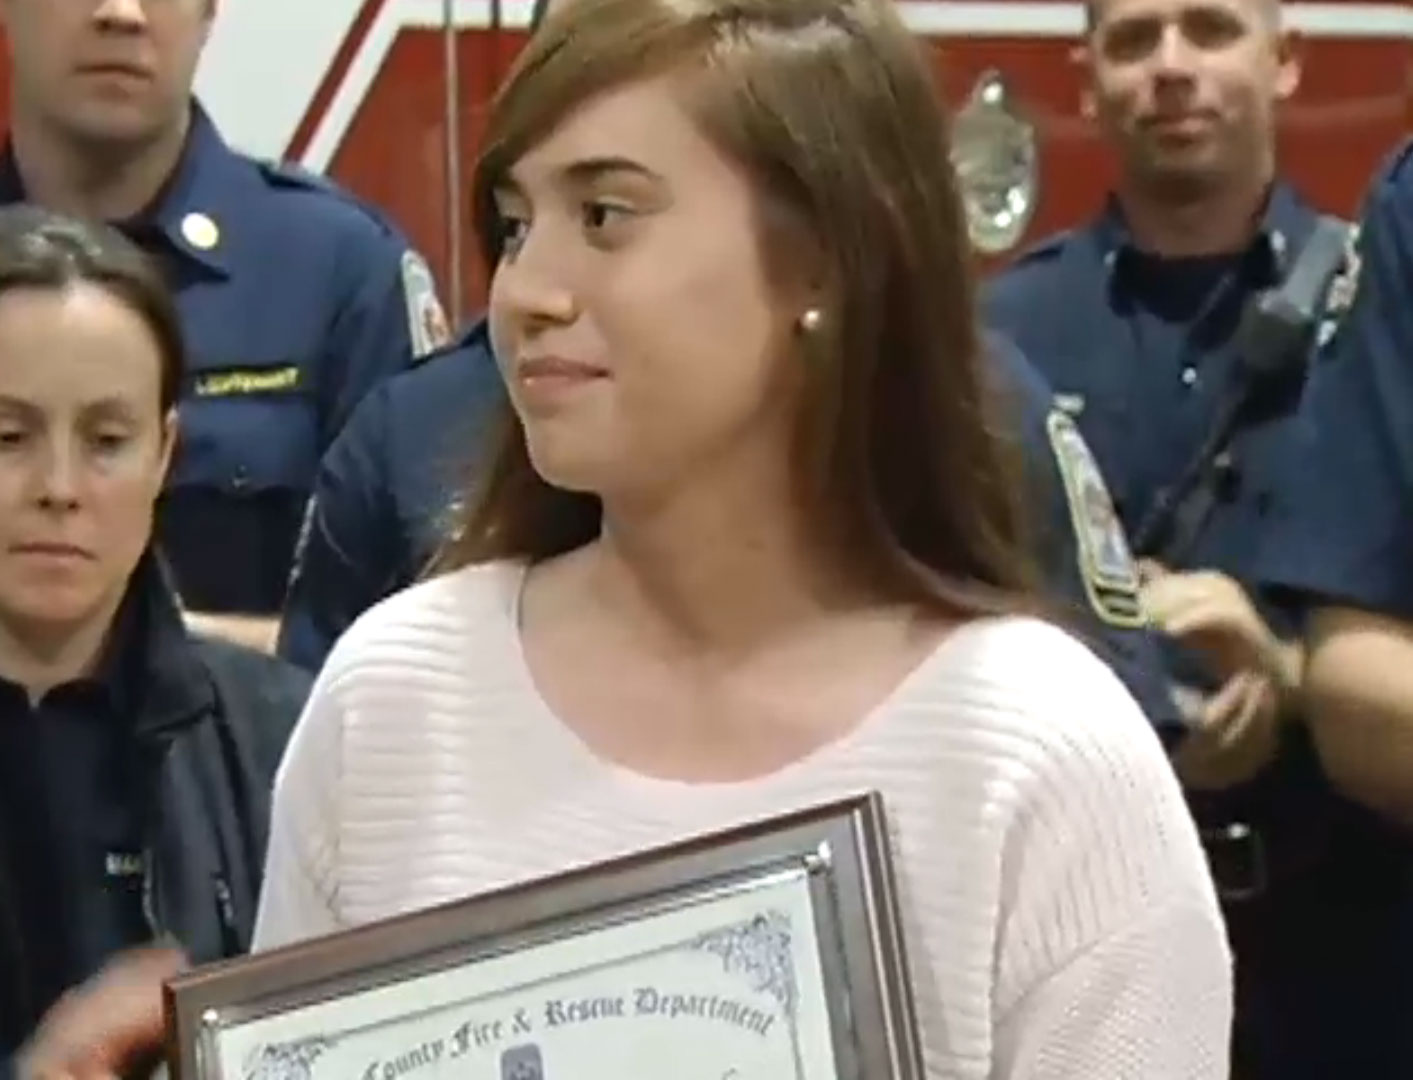 Va. 19-year-old honored for lifting truck off father, stopping fire